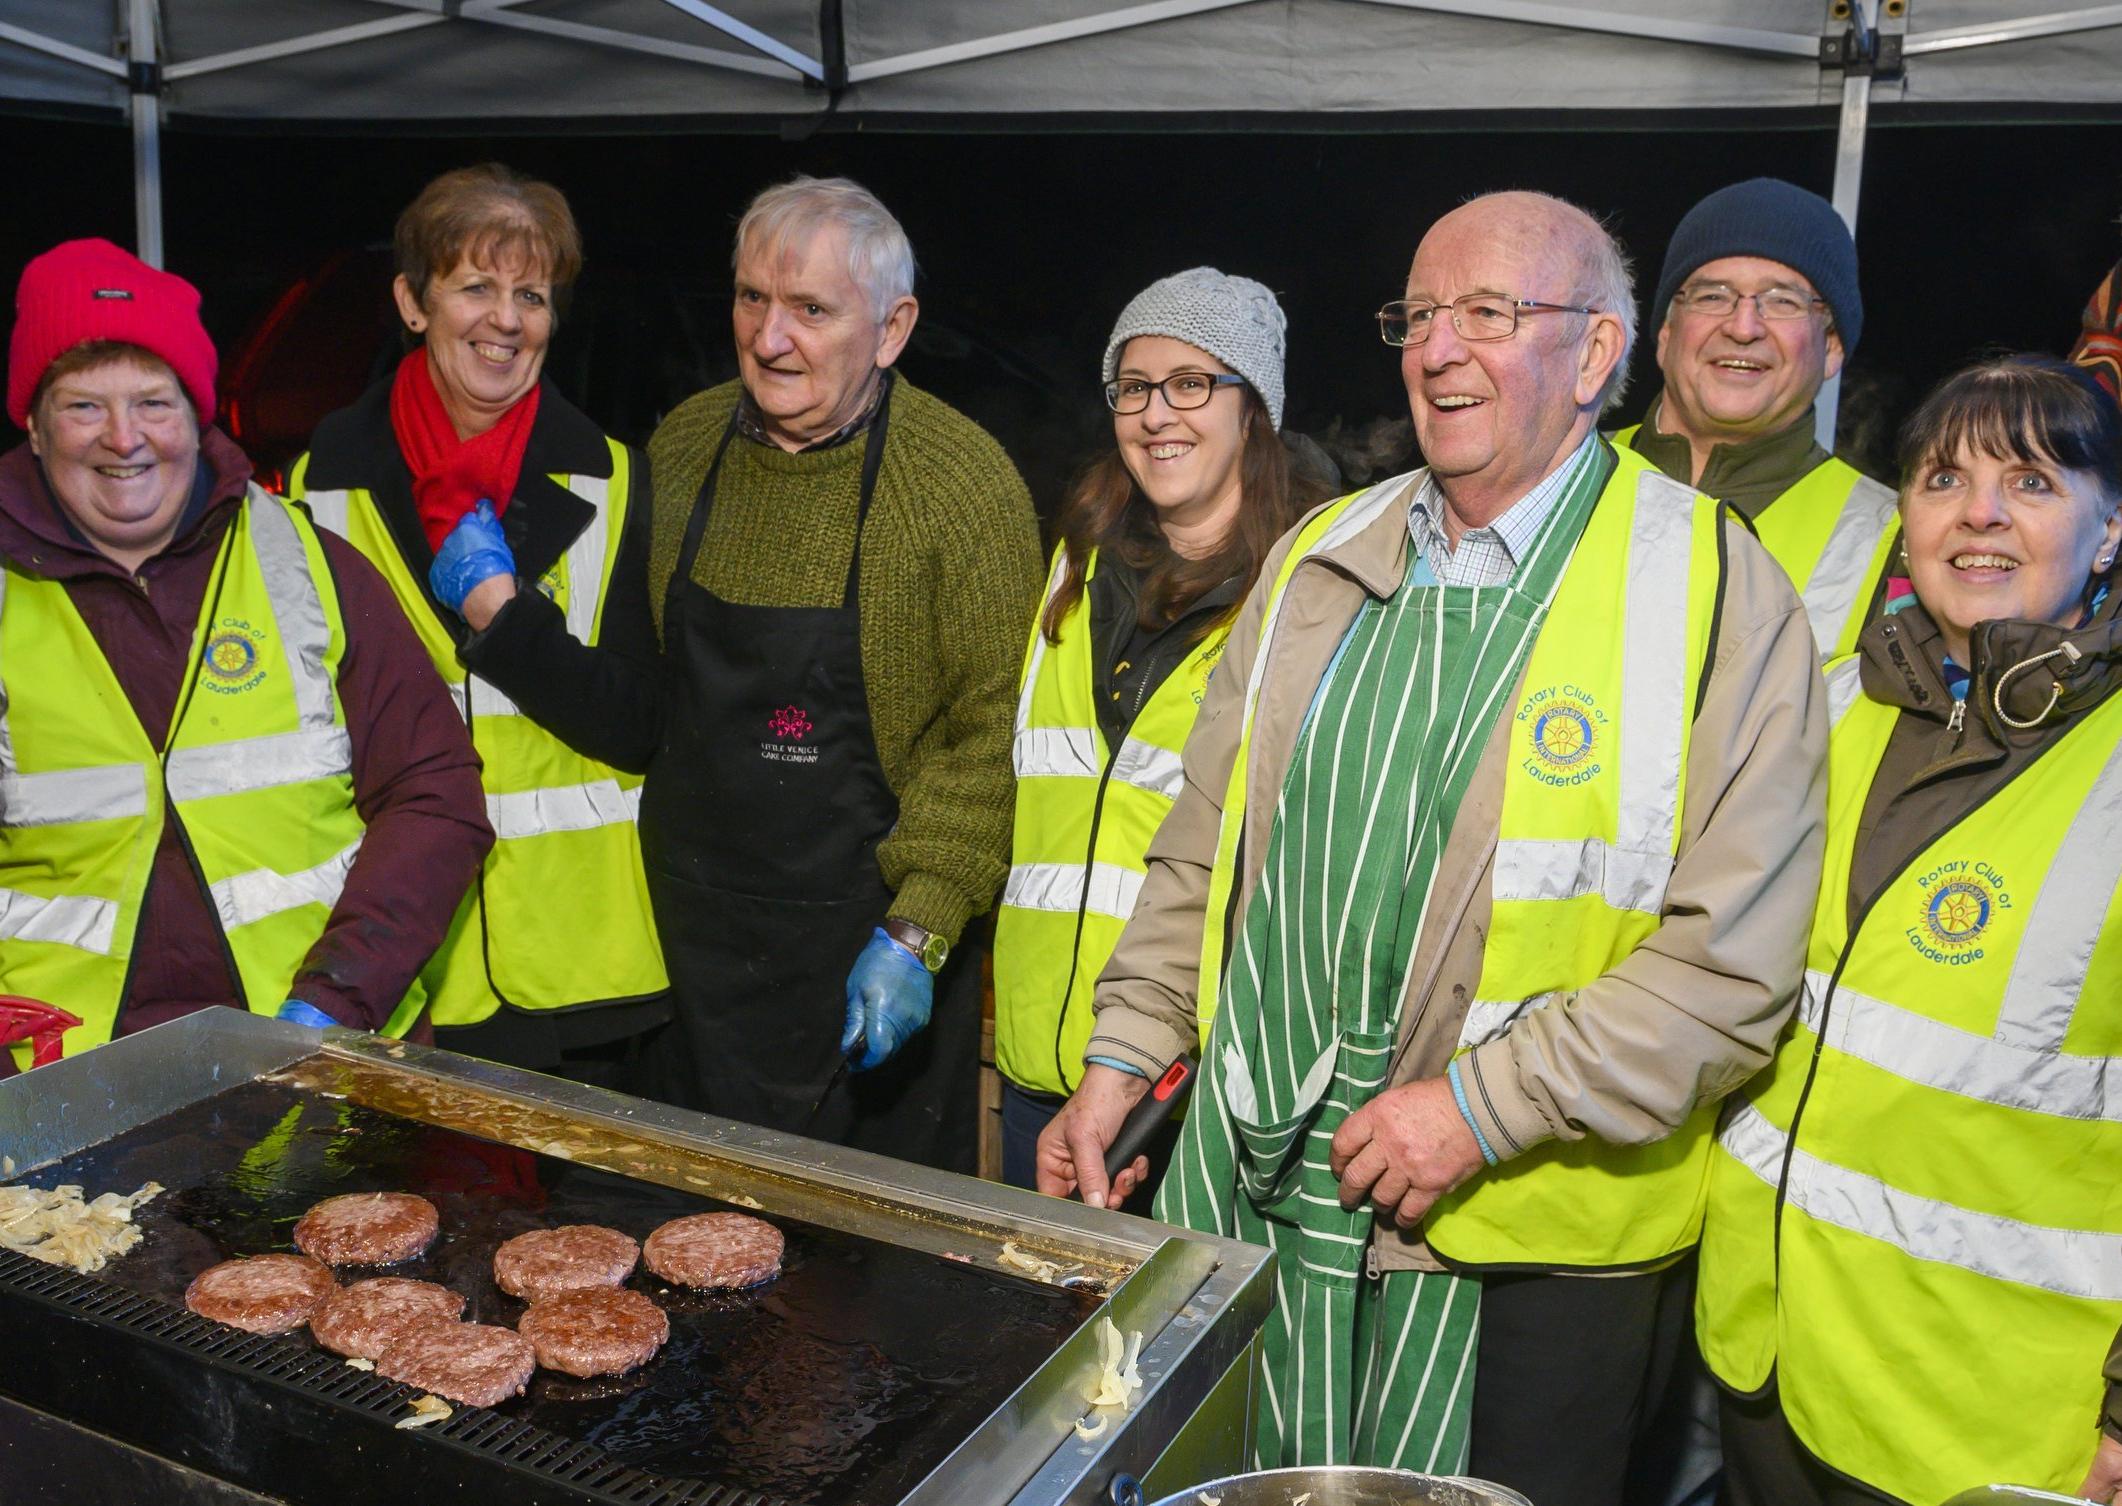 Lauder fireworks display 2019

Lauder Rotary members doing the serving up food and drinks on the night

Pic Phil Wilkinson 
info@philspix.com